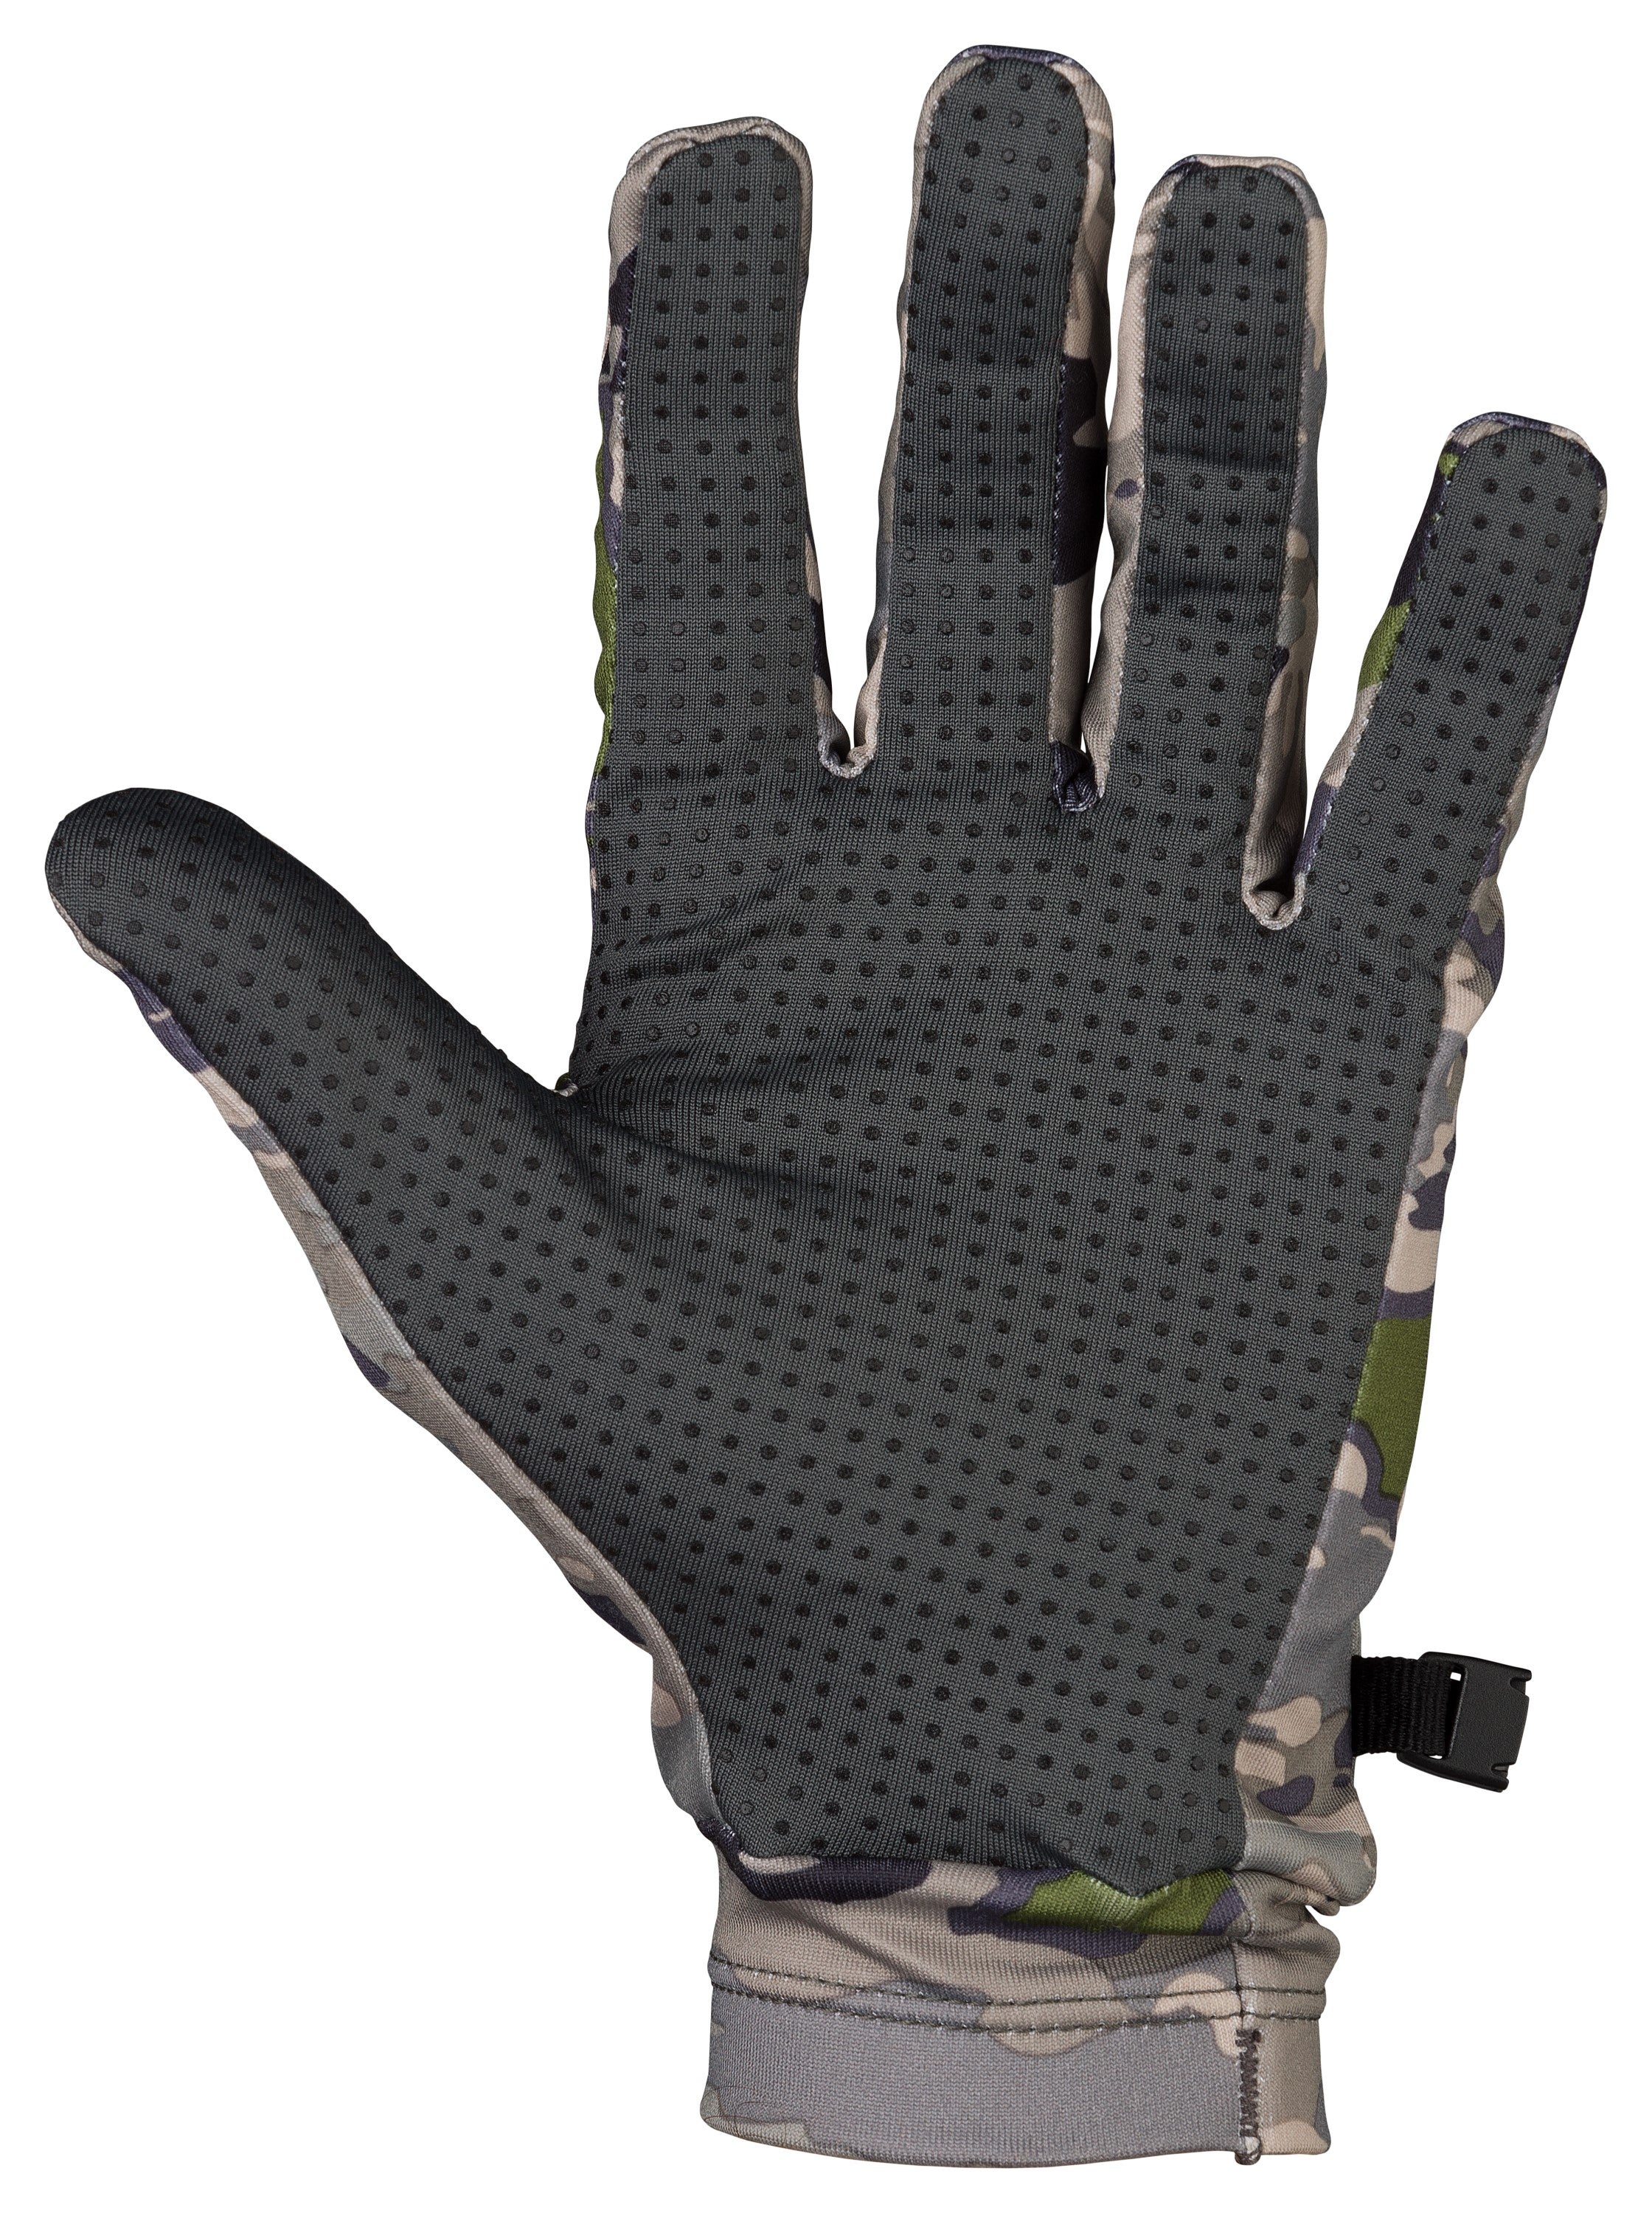 https://www.browning.com/content/dam/browning/product/clothing/2022/big-game/riser-2-0-glove/riser-2.0-glove-ovix-30702134-02.jpg